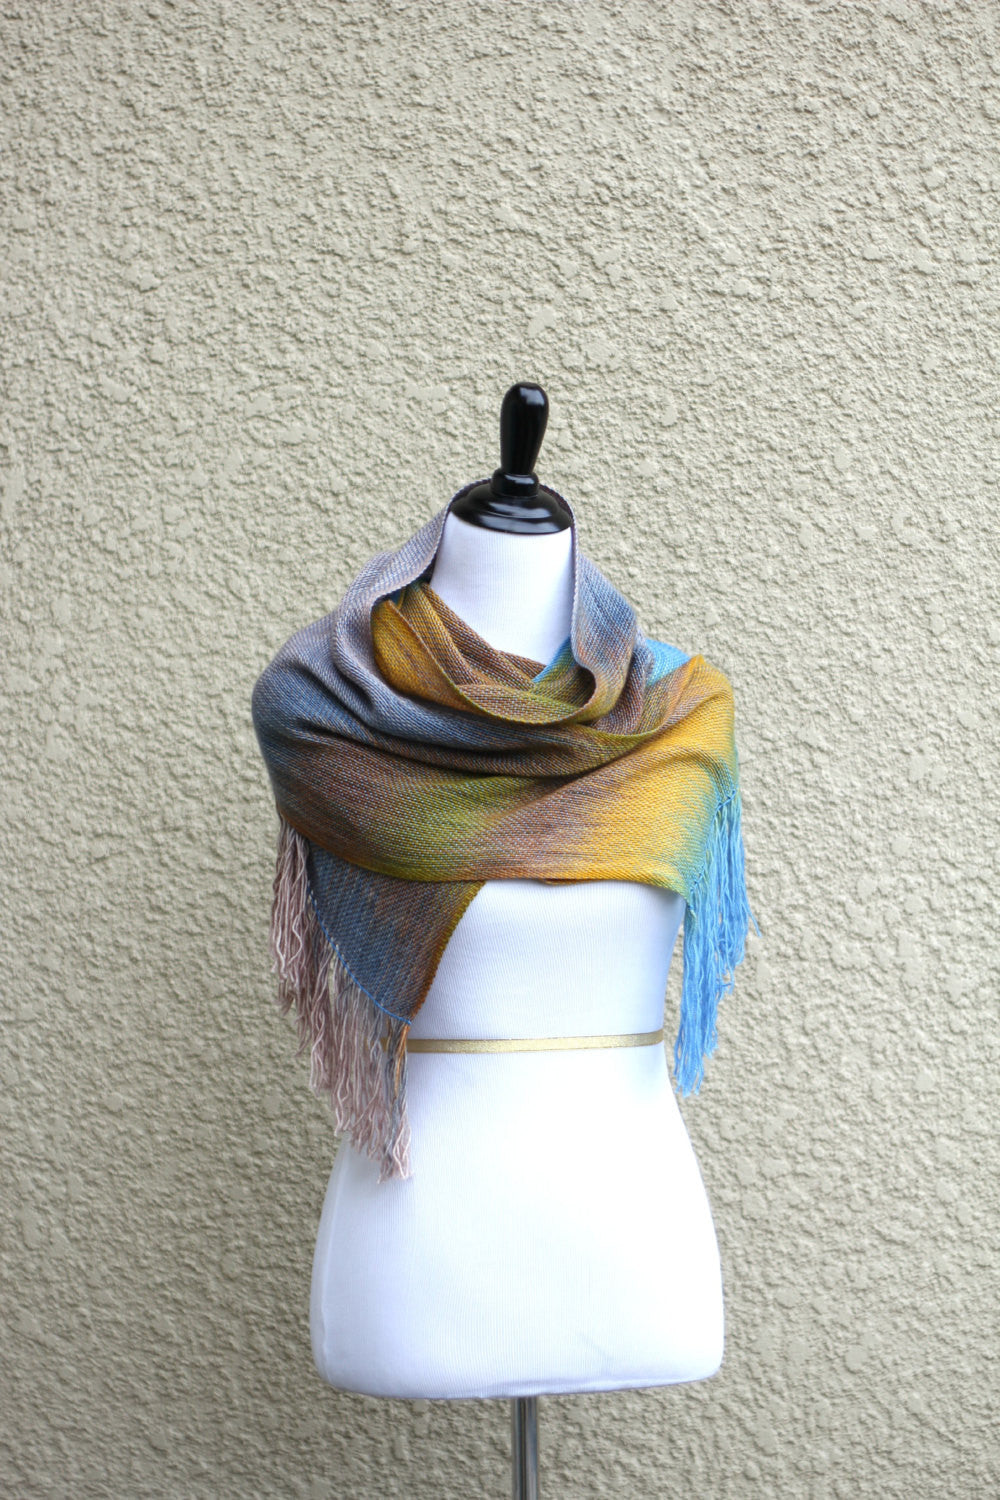 Woven scarf in yellow, blue and brown colors